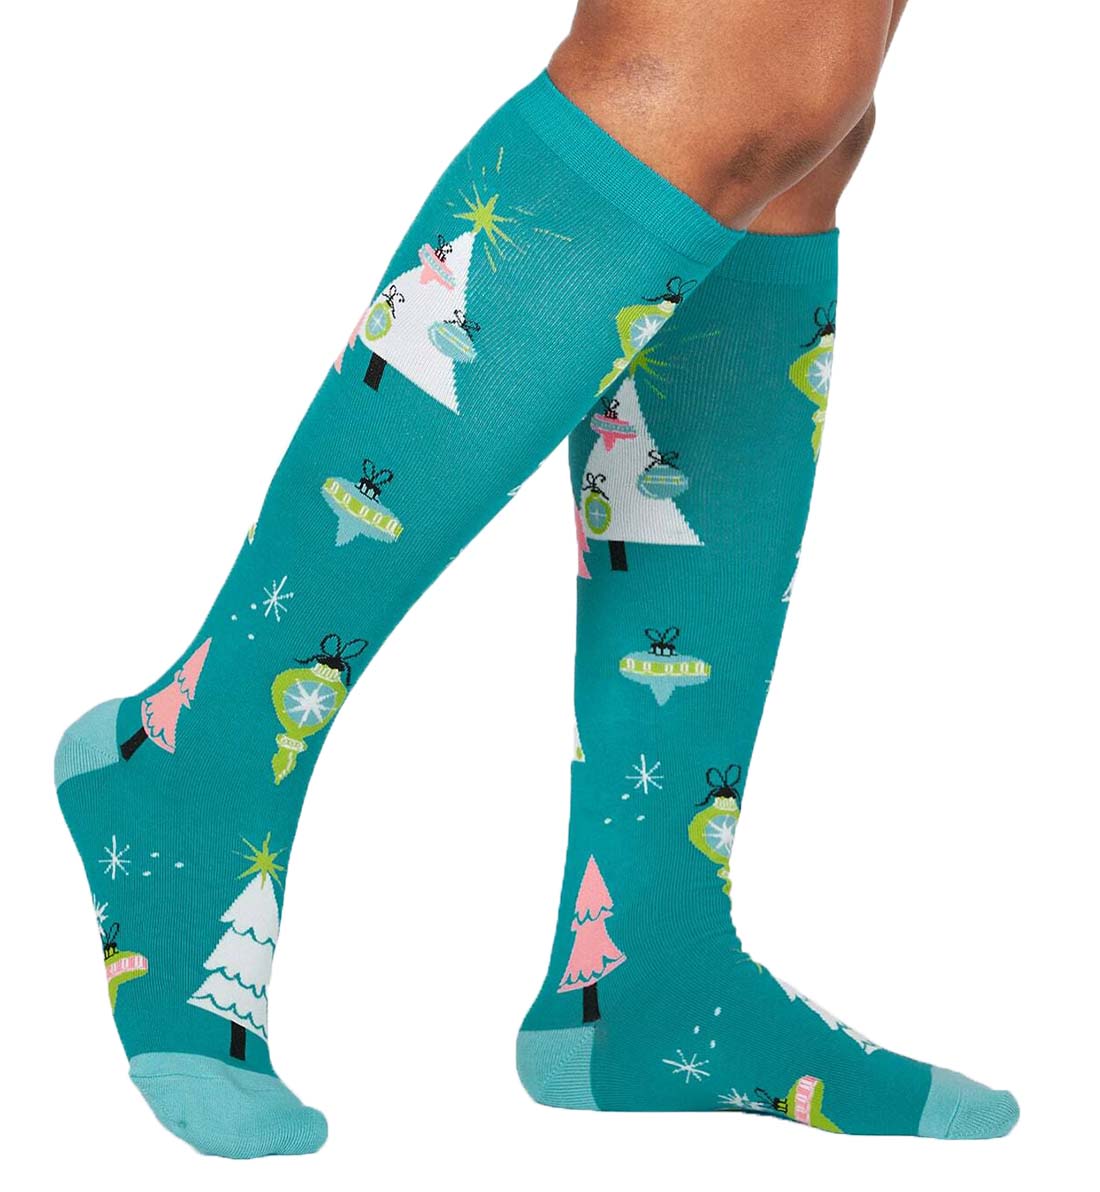 SOCK it to me Unisex Knee High Socks (f0493), Holly Jolly Christmas - Holly Jolly Christmas,One Size